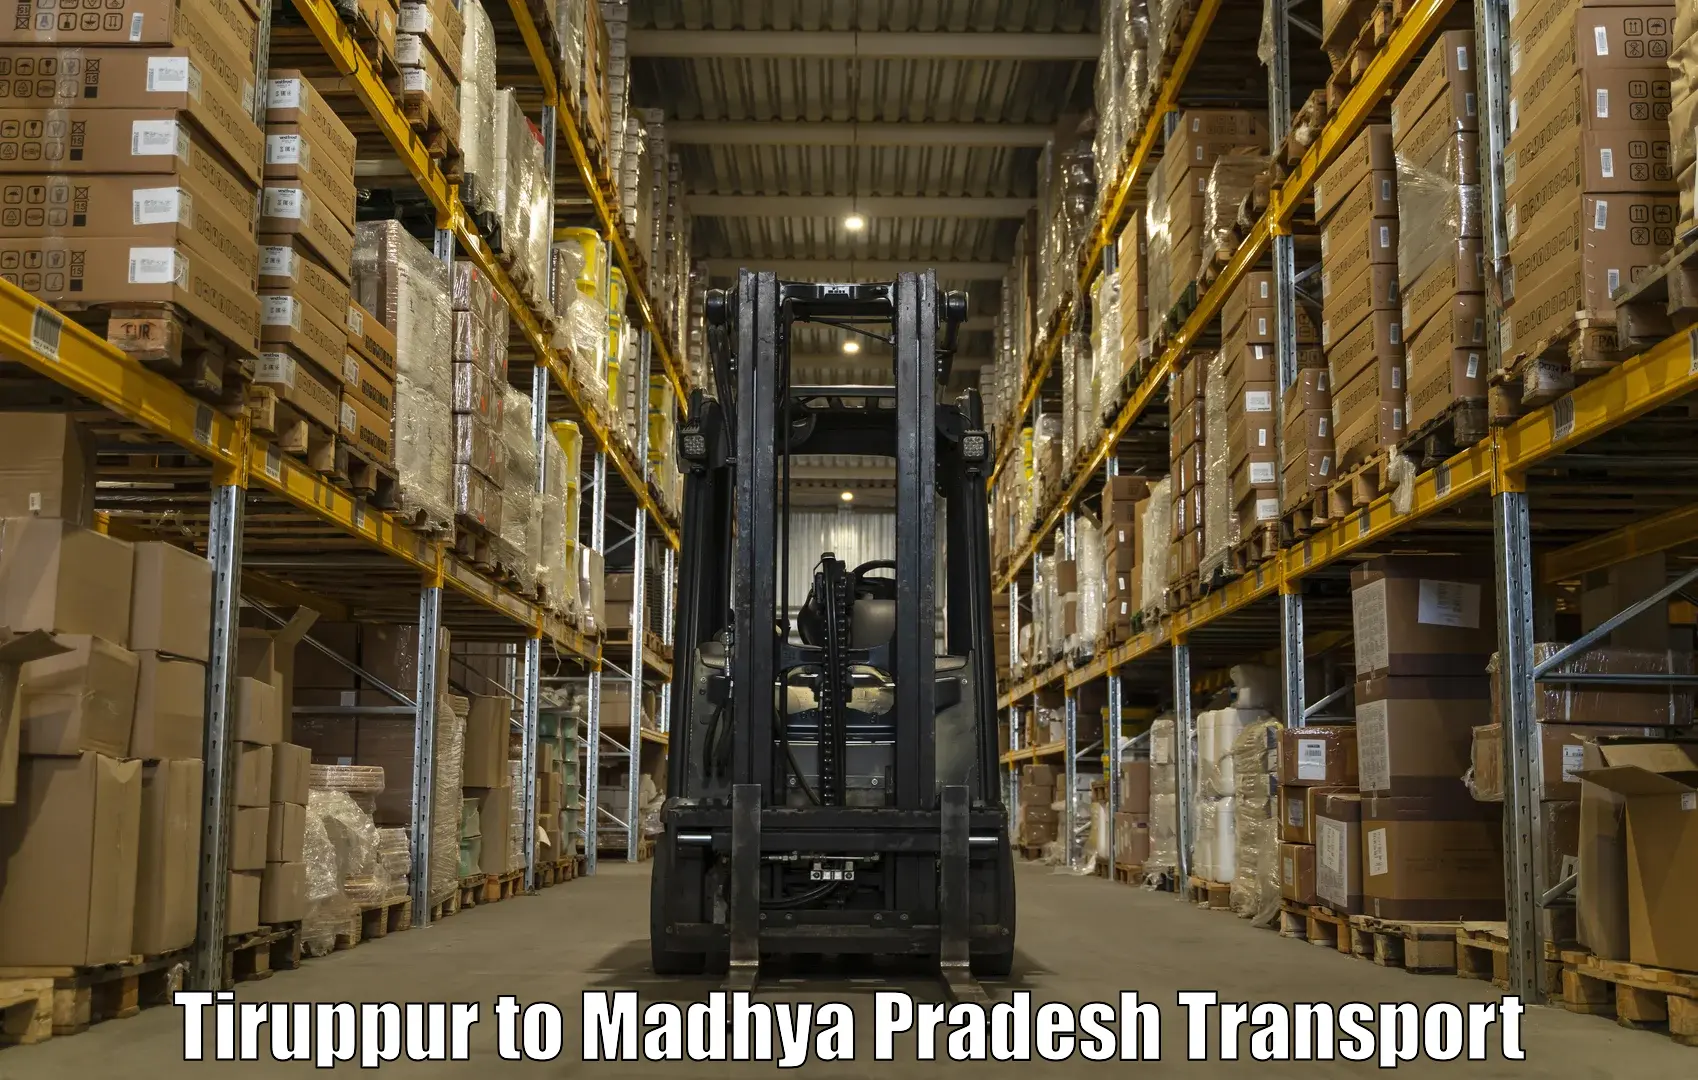 Lorry transport service Tiruppur to Gwalior